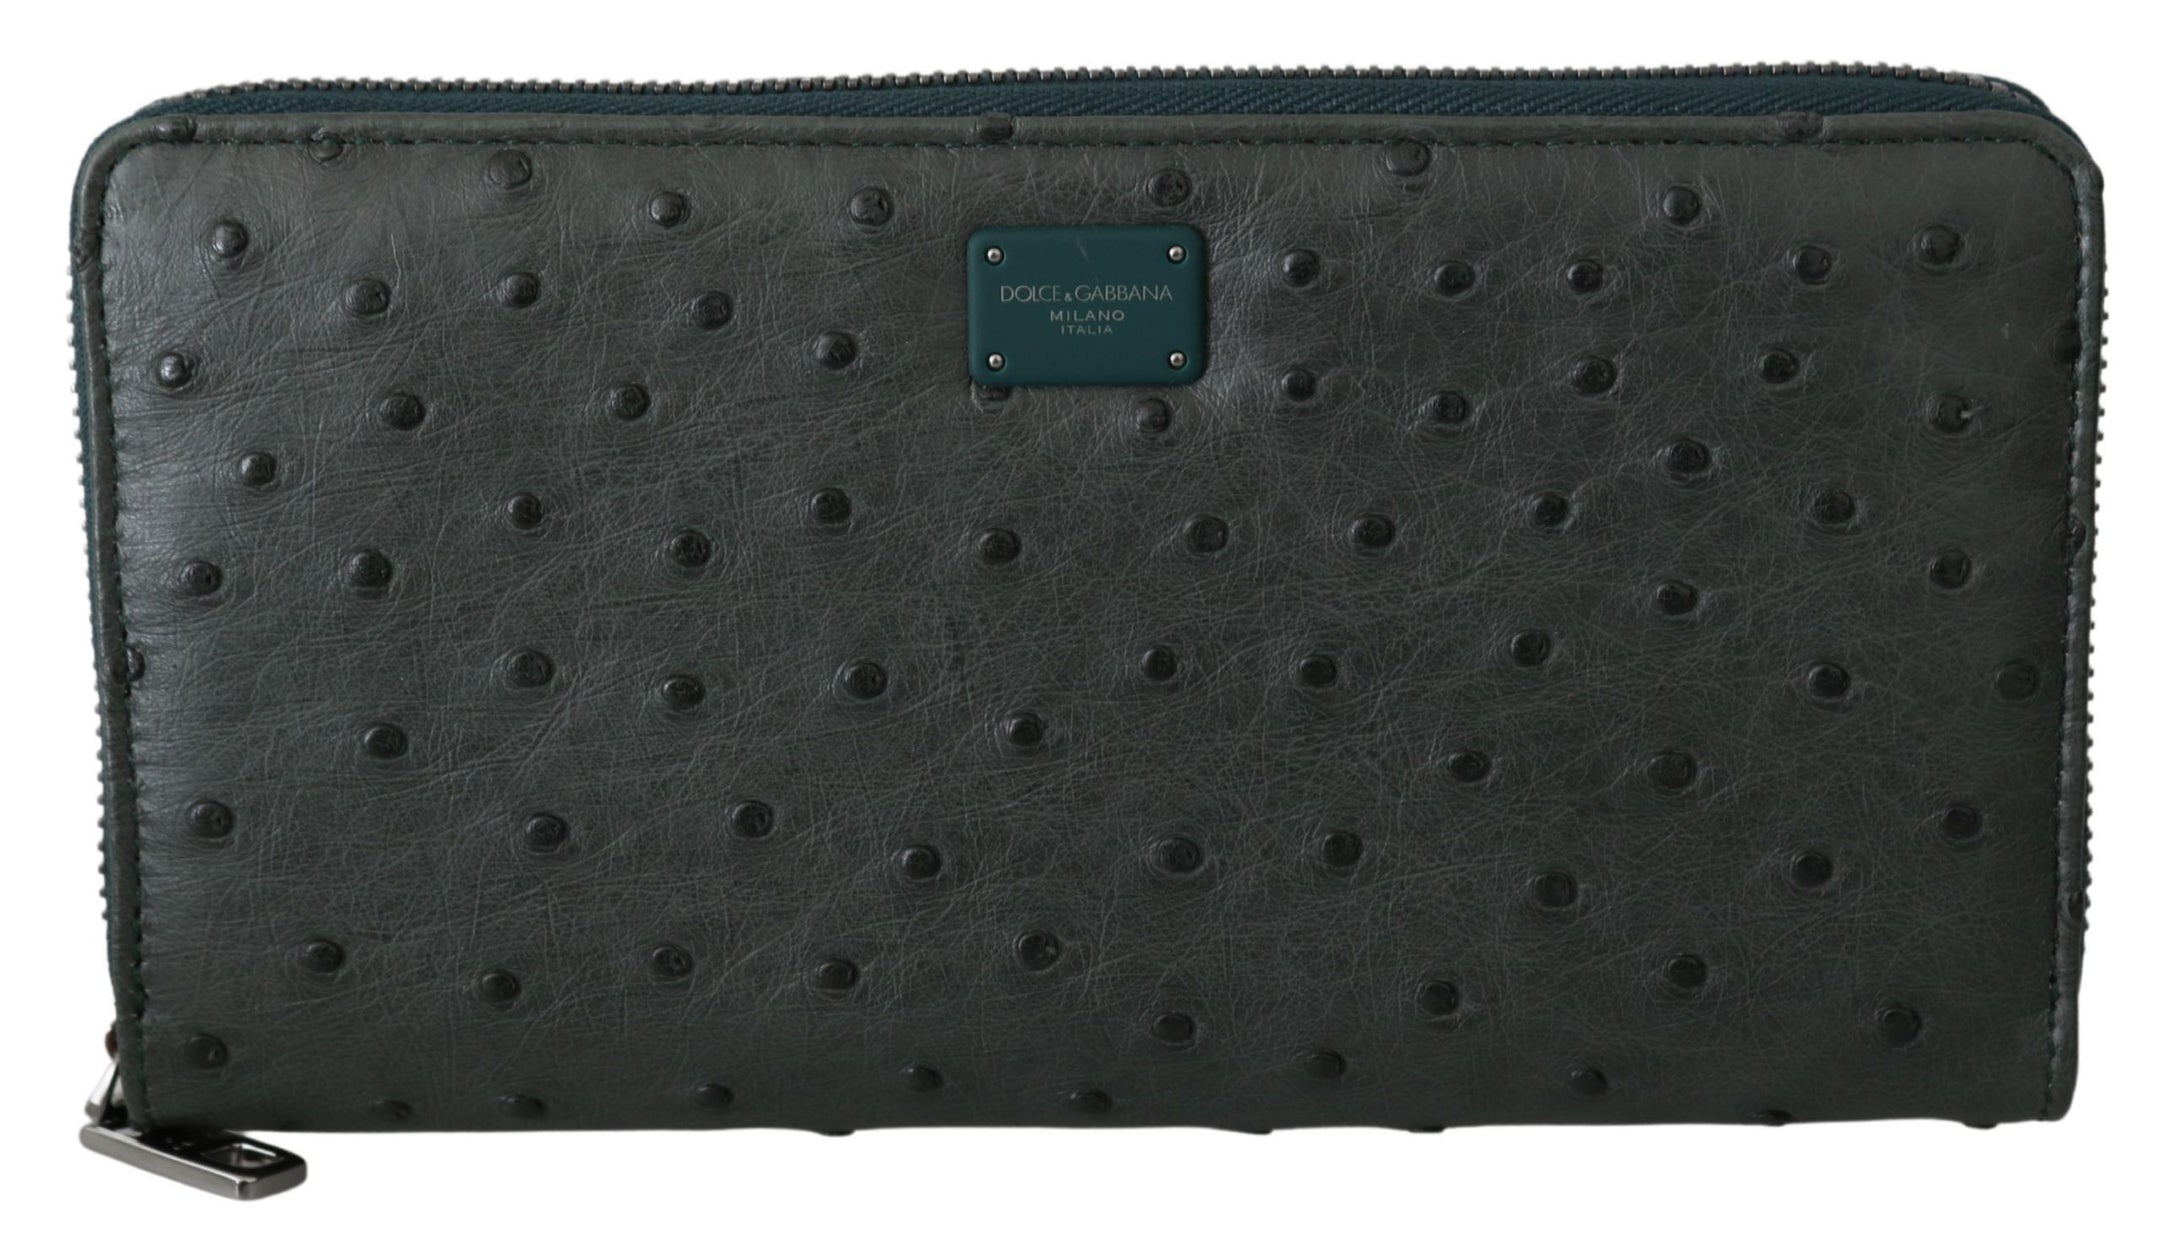 Exquisite Green Ostrich Leather Continental Wallet